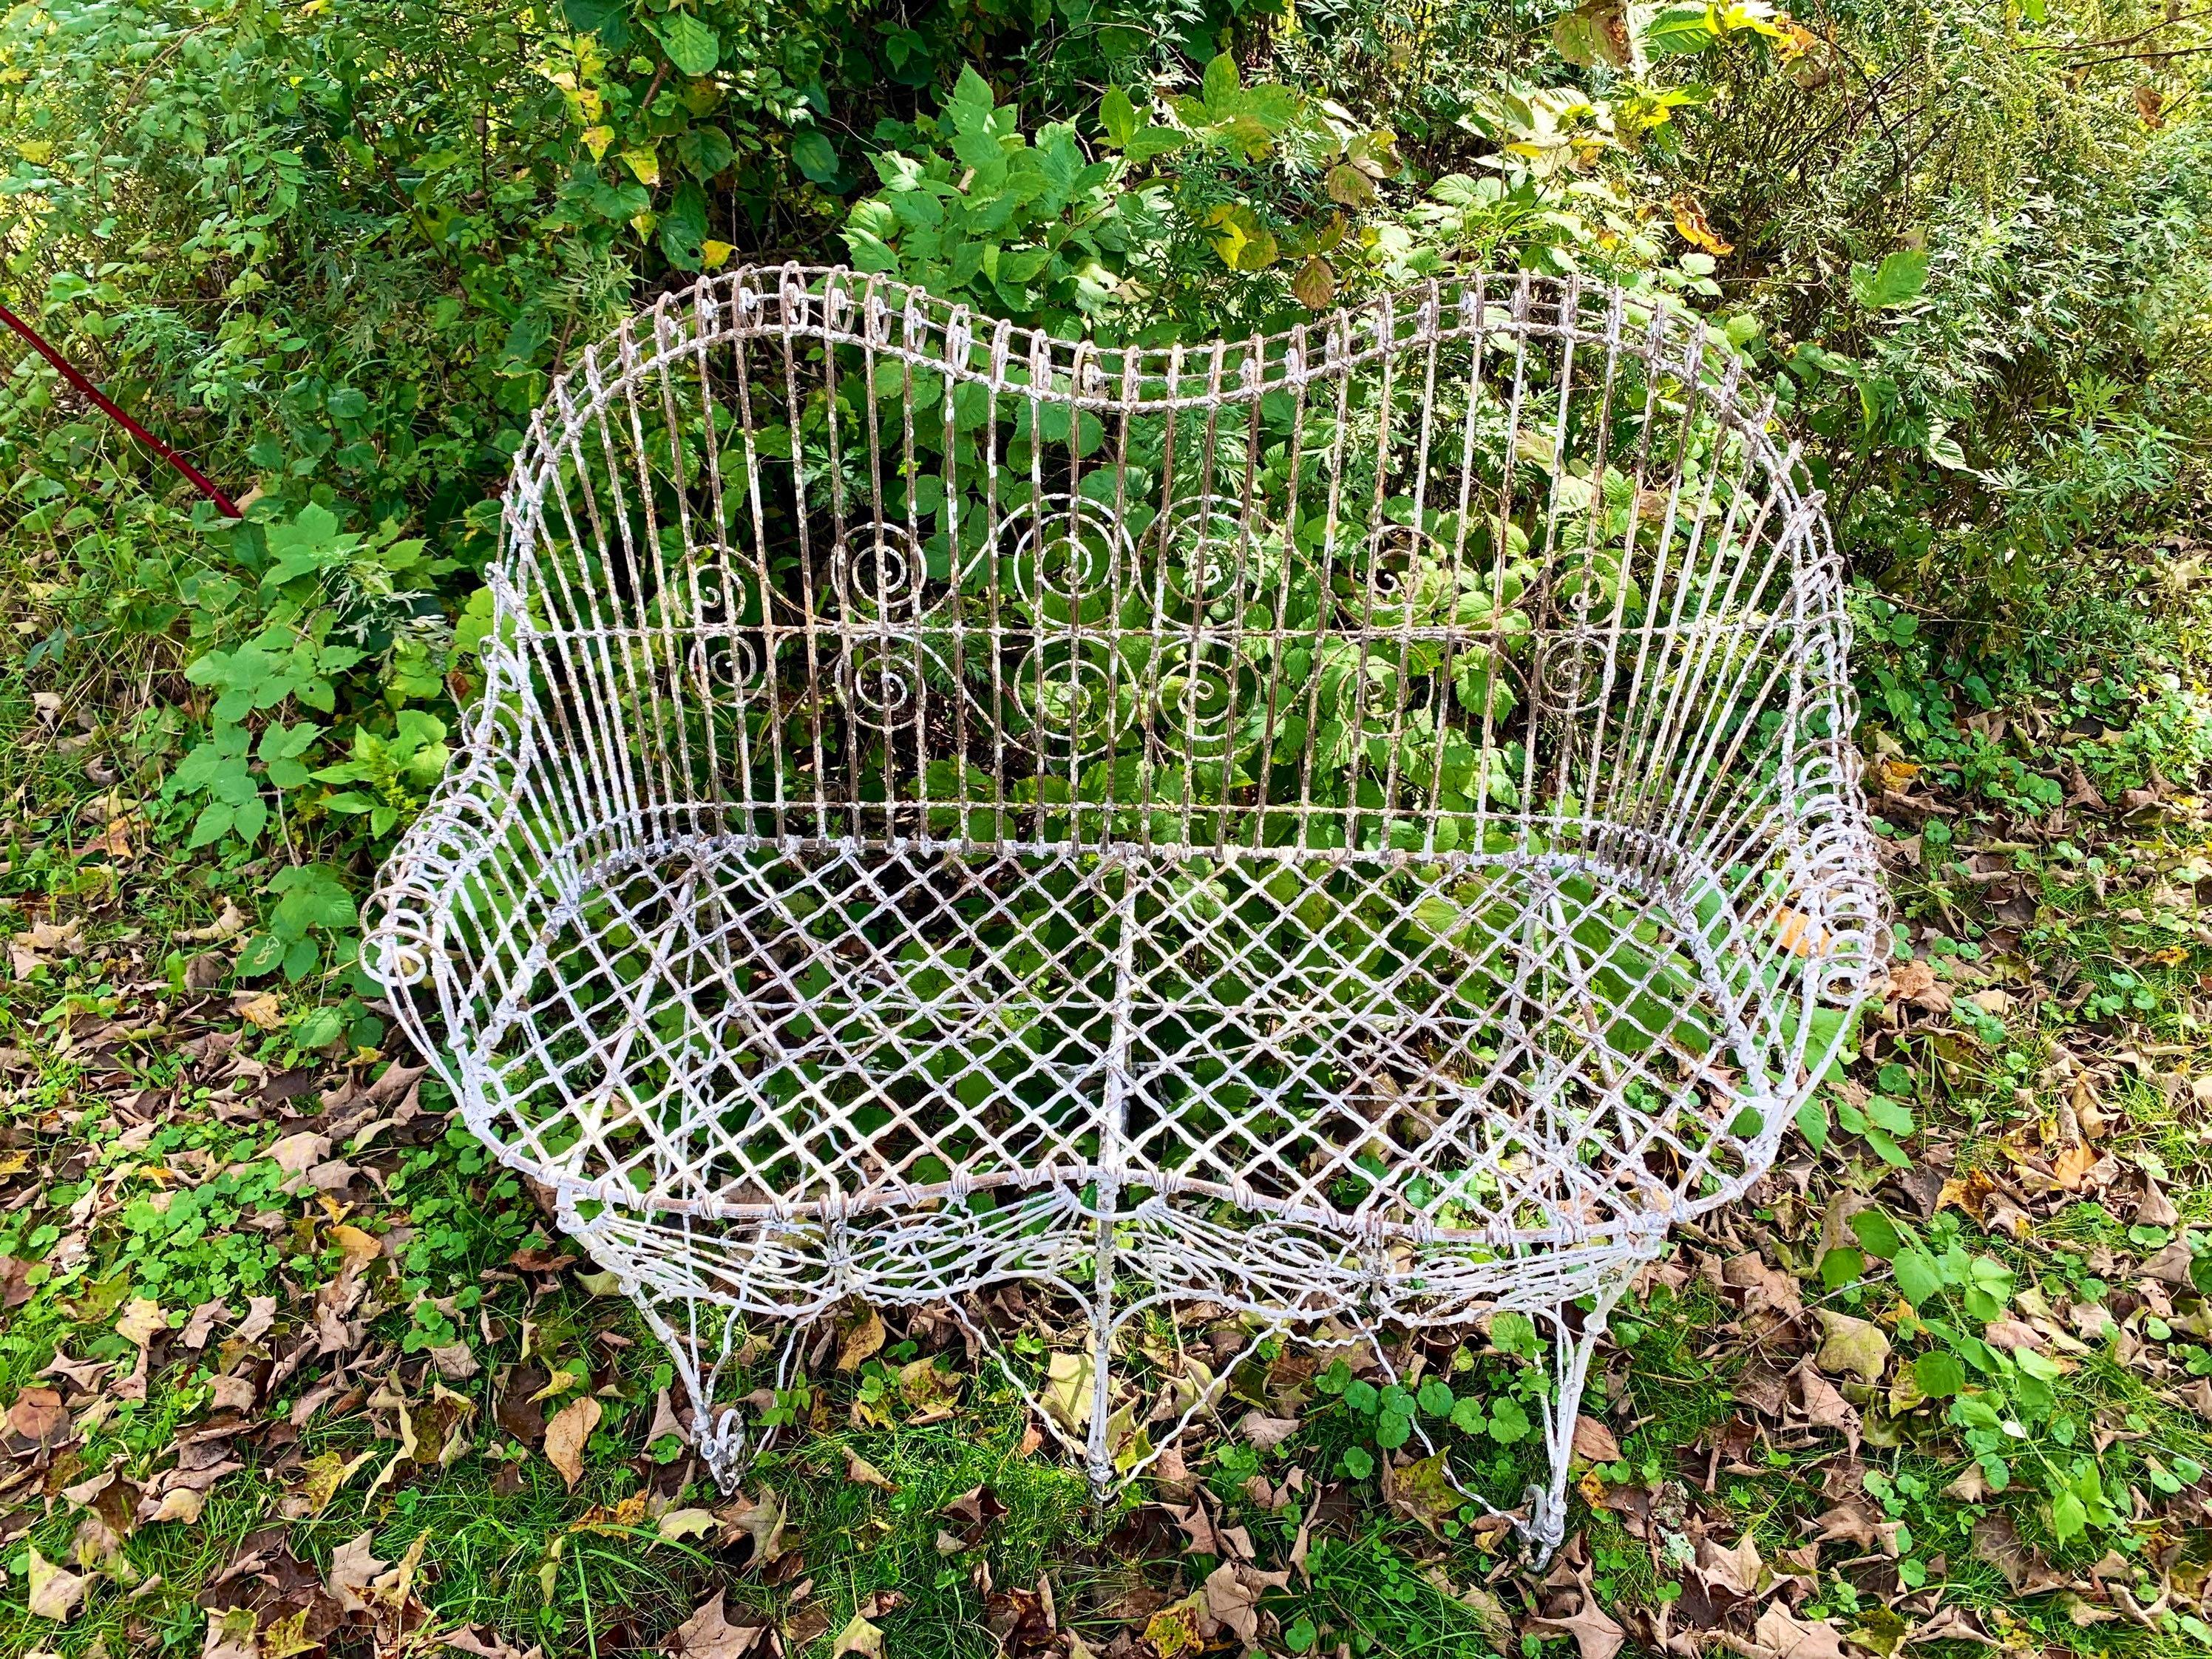 Antique Victorian garden settee loveseat.

Intricate Wrought Iron Wireworks Detail
Perfect for any garden or terrace
In stock and ready to ship today.